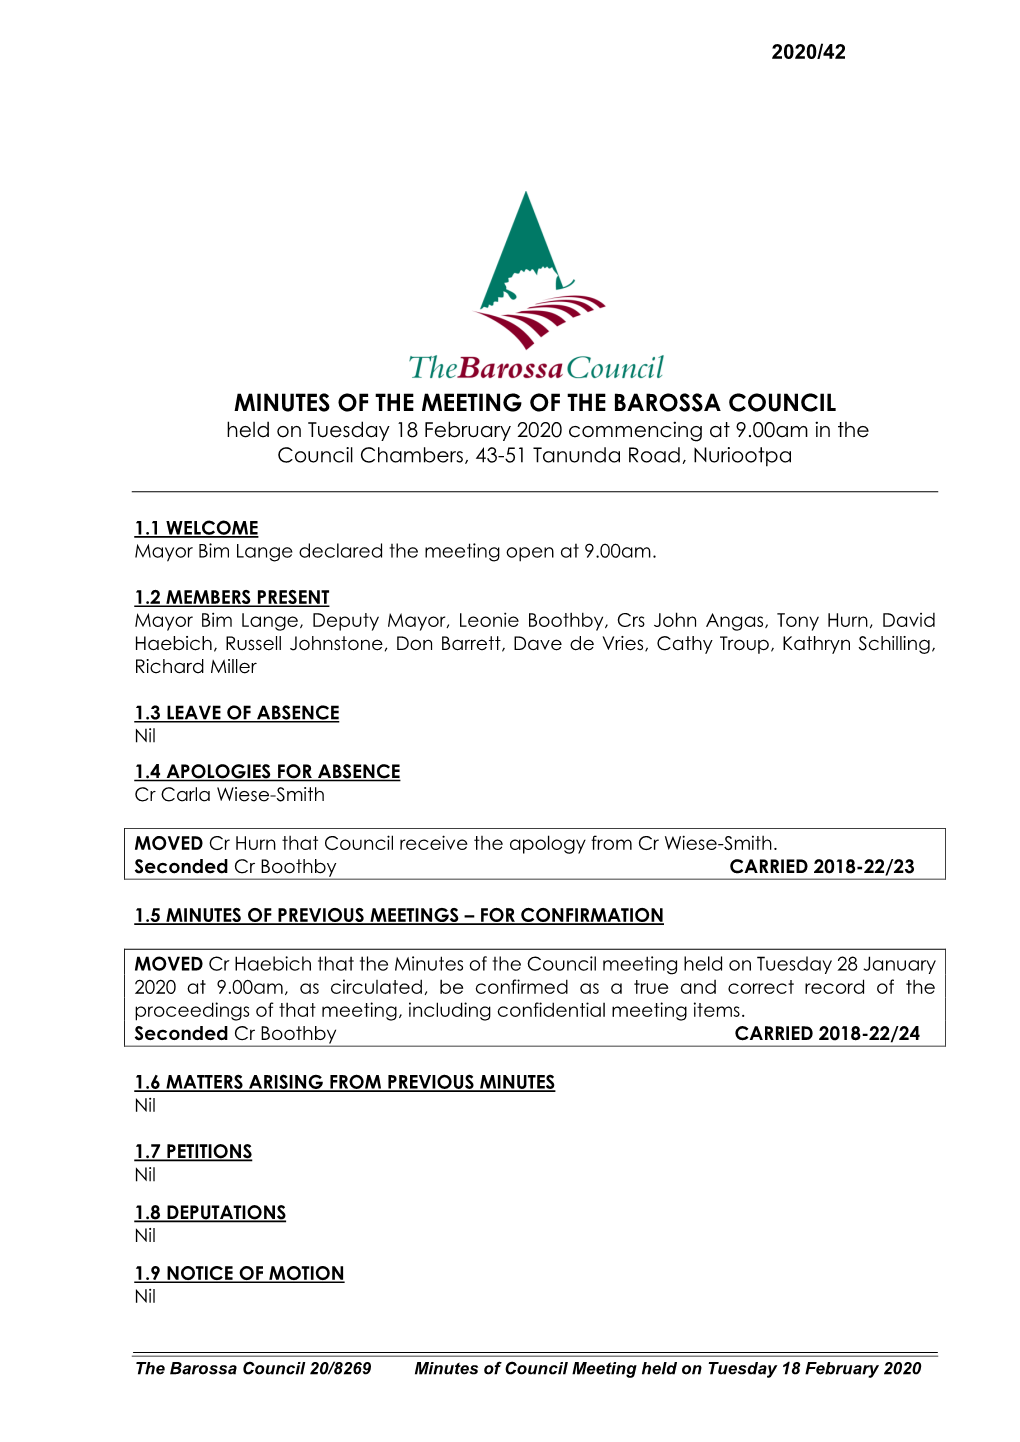 MINUTES of the MEETING of the BAROSSA COUNCIL Held on Tuesday 18 February 2020 Commencing at 9.00Am in the Council Chambers, 43-51 Tanunda Road, Nuriootpa